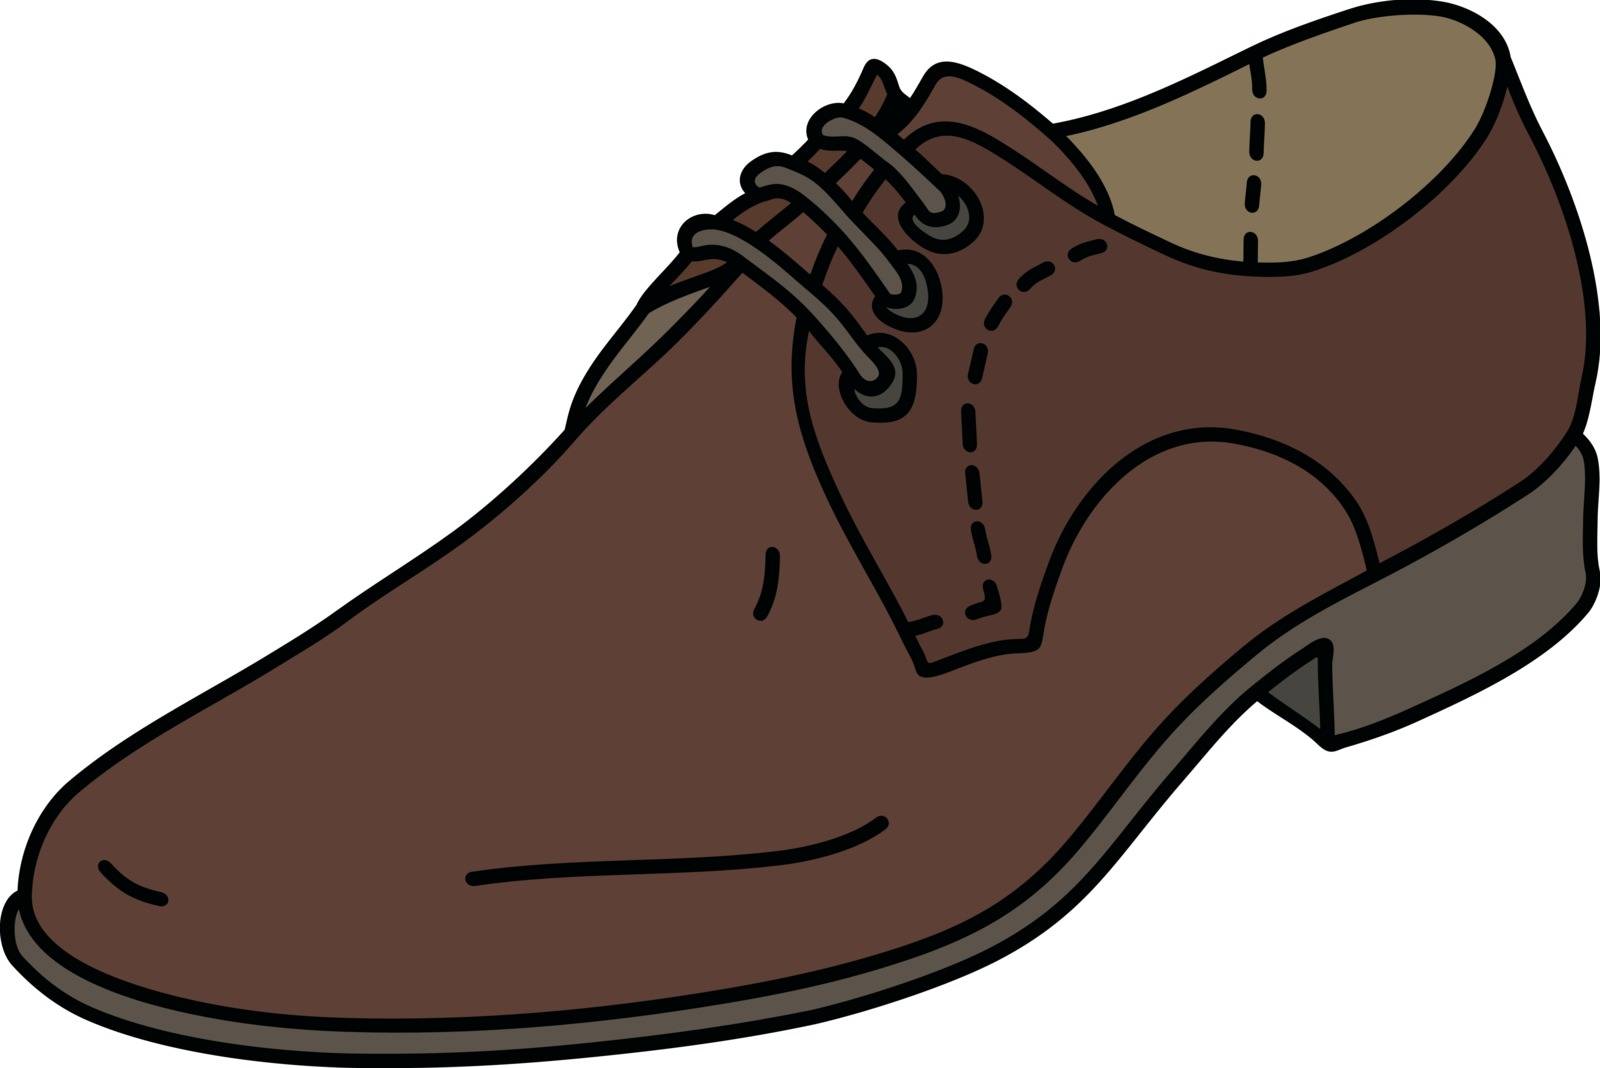 The brown shoe by vostal